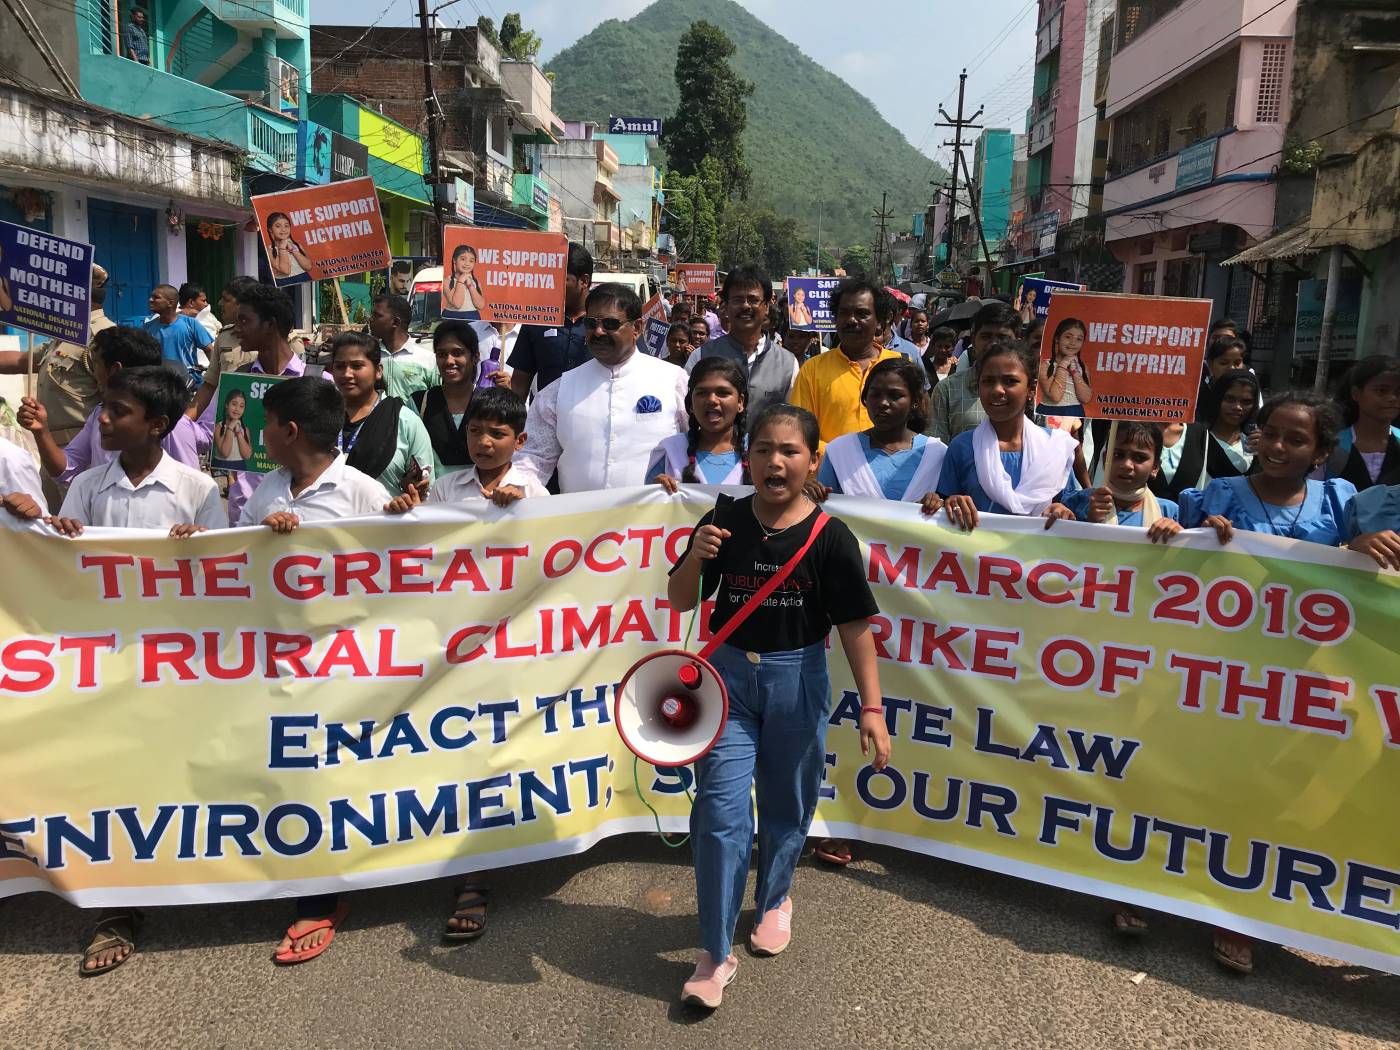 Youth climate activist, Licypriya Kangujam, leads a climate strike in eastern Odisha state, India, on October 27, 2019. HANDOUT/The Child Movement